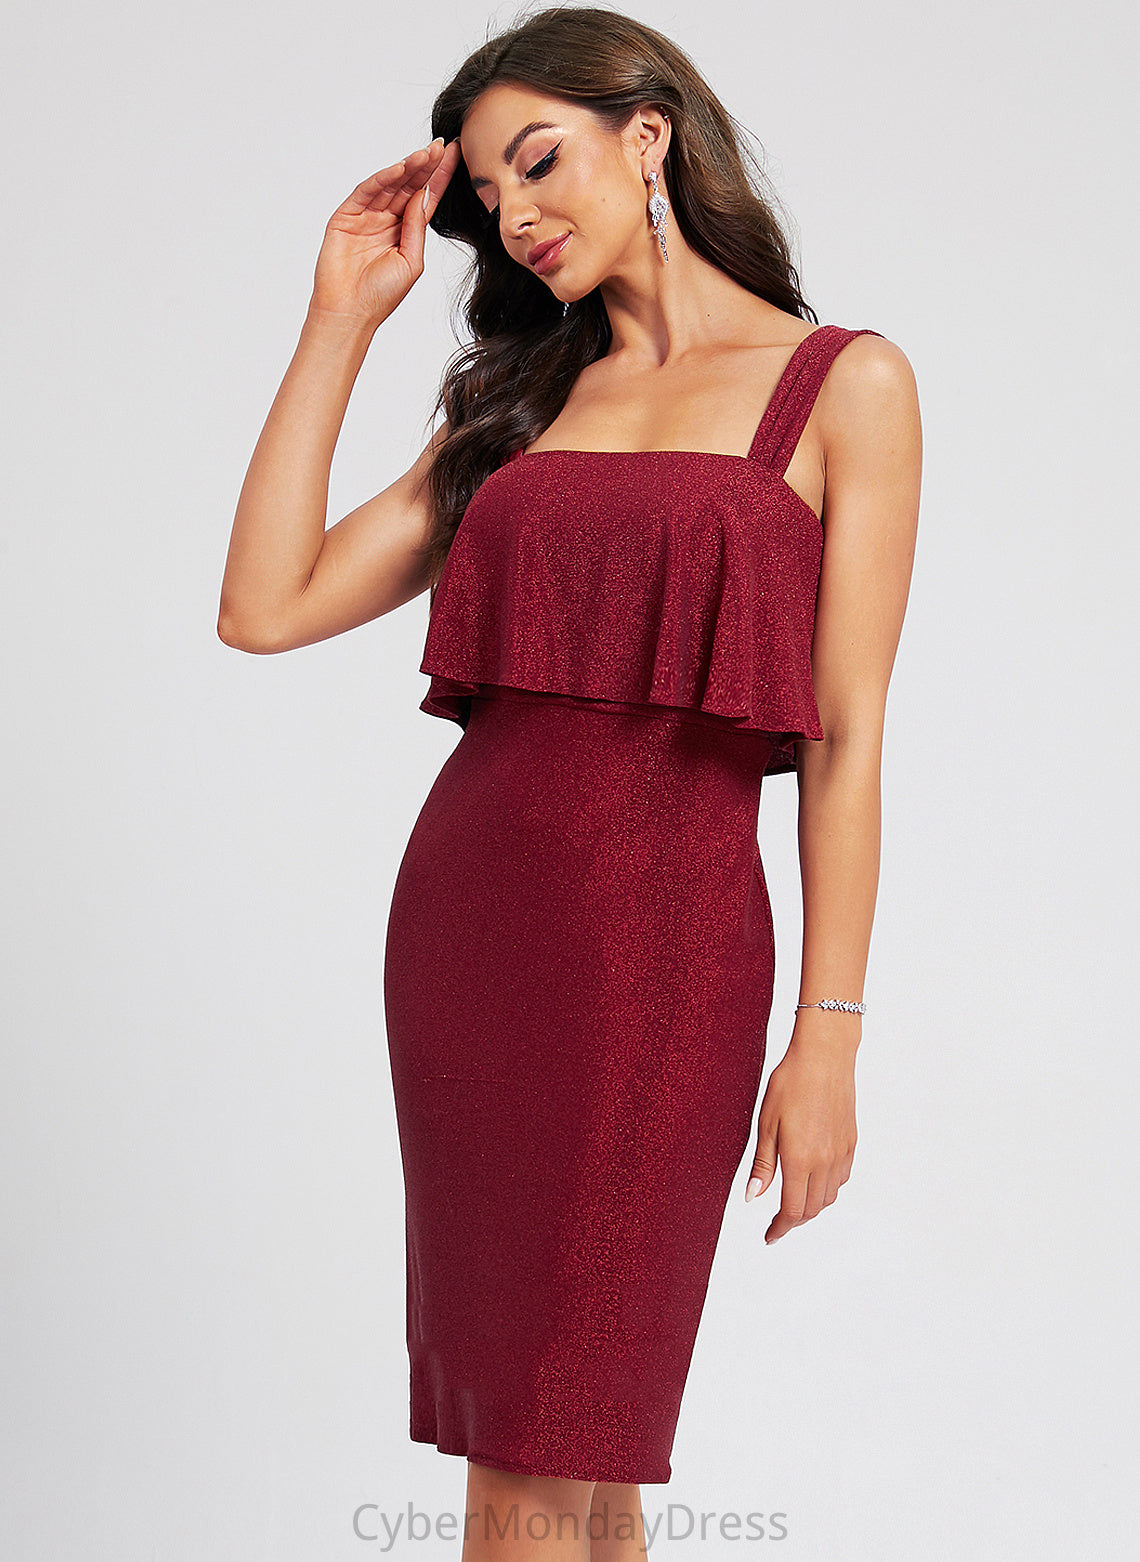 Cocktail Dresses With Knee-Length Sheath/Column Cocktail Polyester Lesly Ruffle Neckline Square Dress